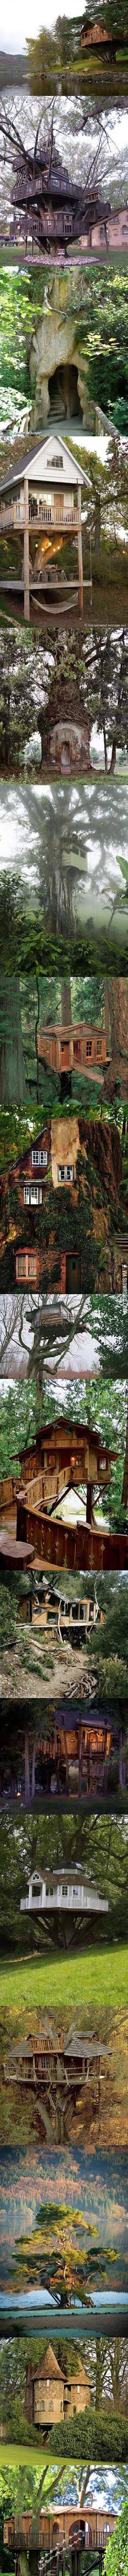 I+Need+A+Grownup+Tree+House+In+My+Life